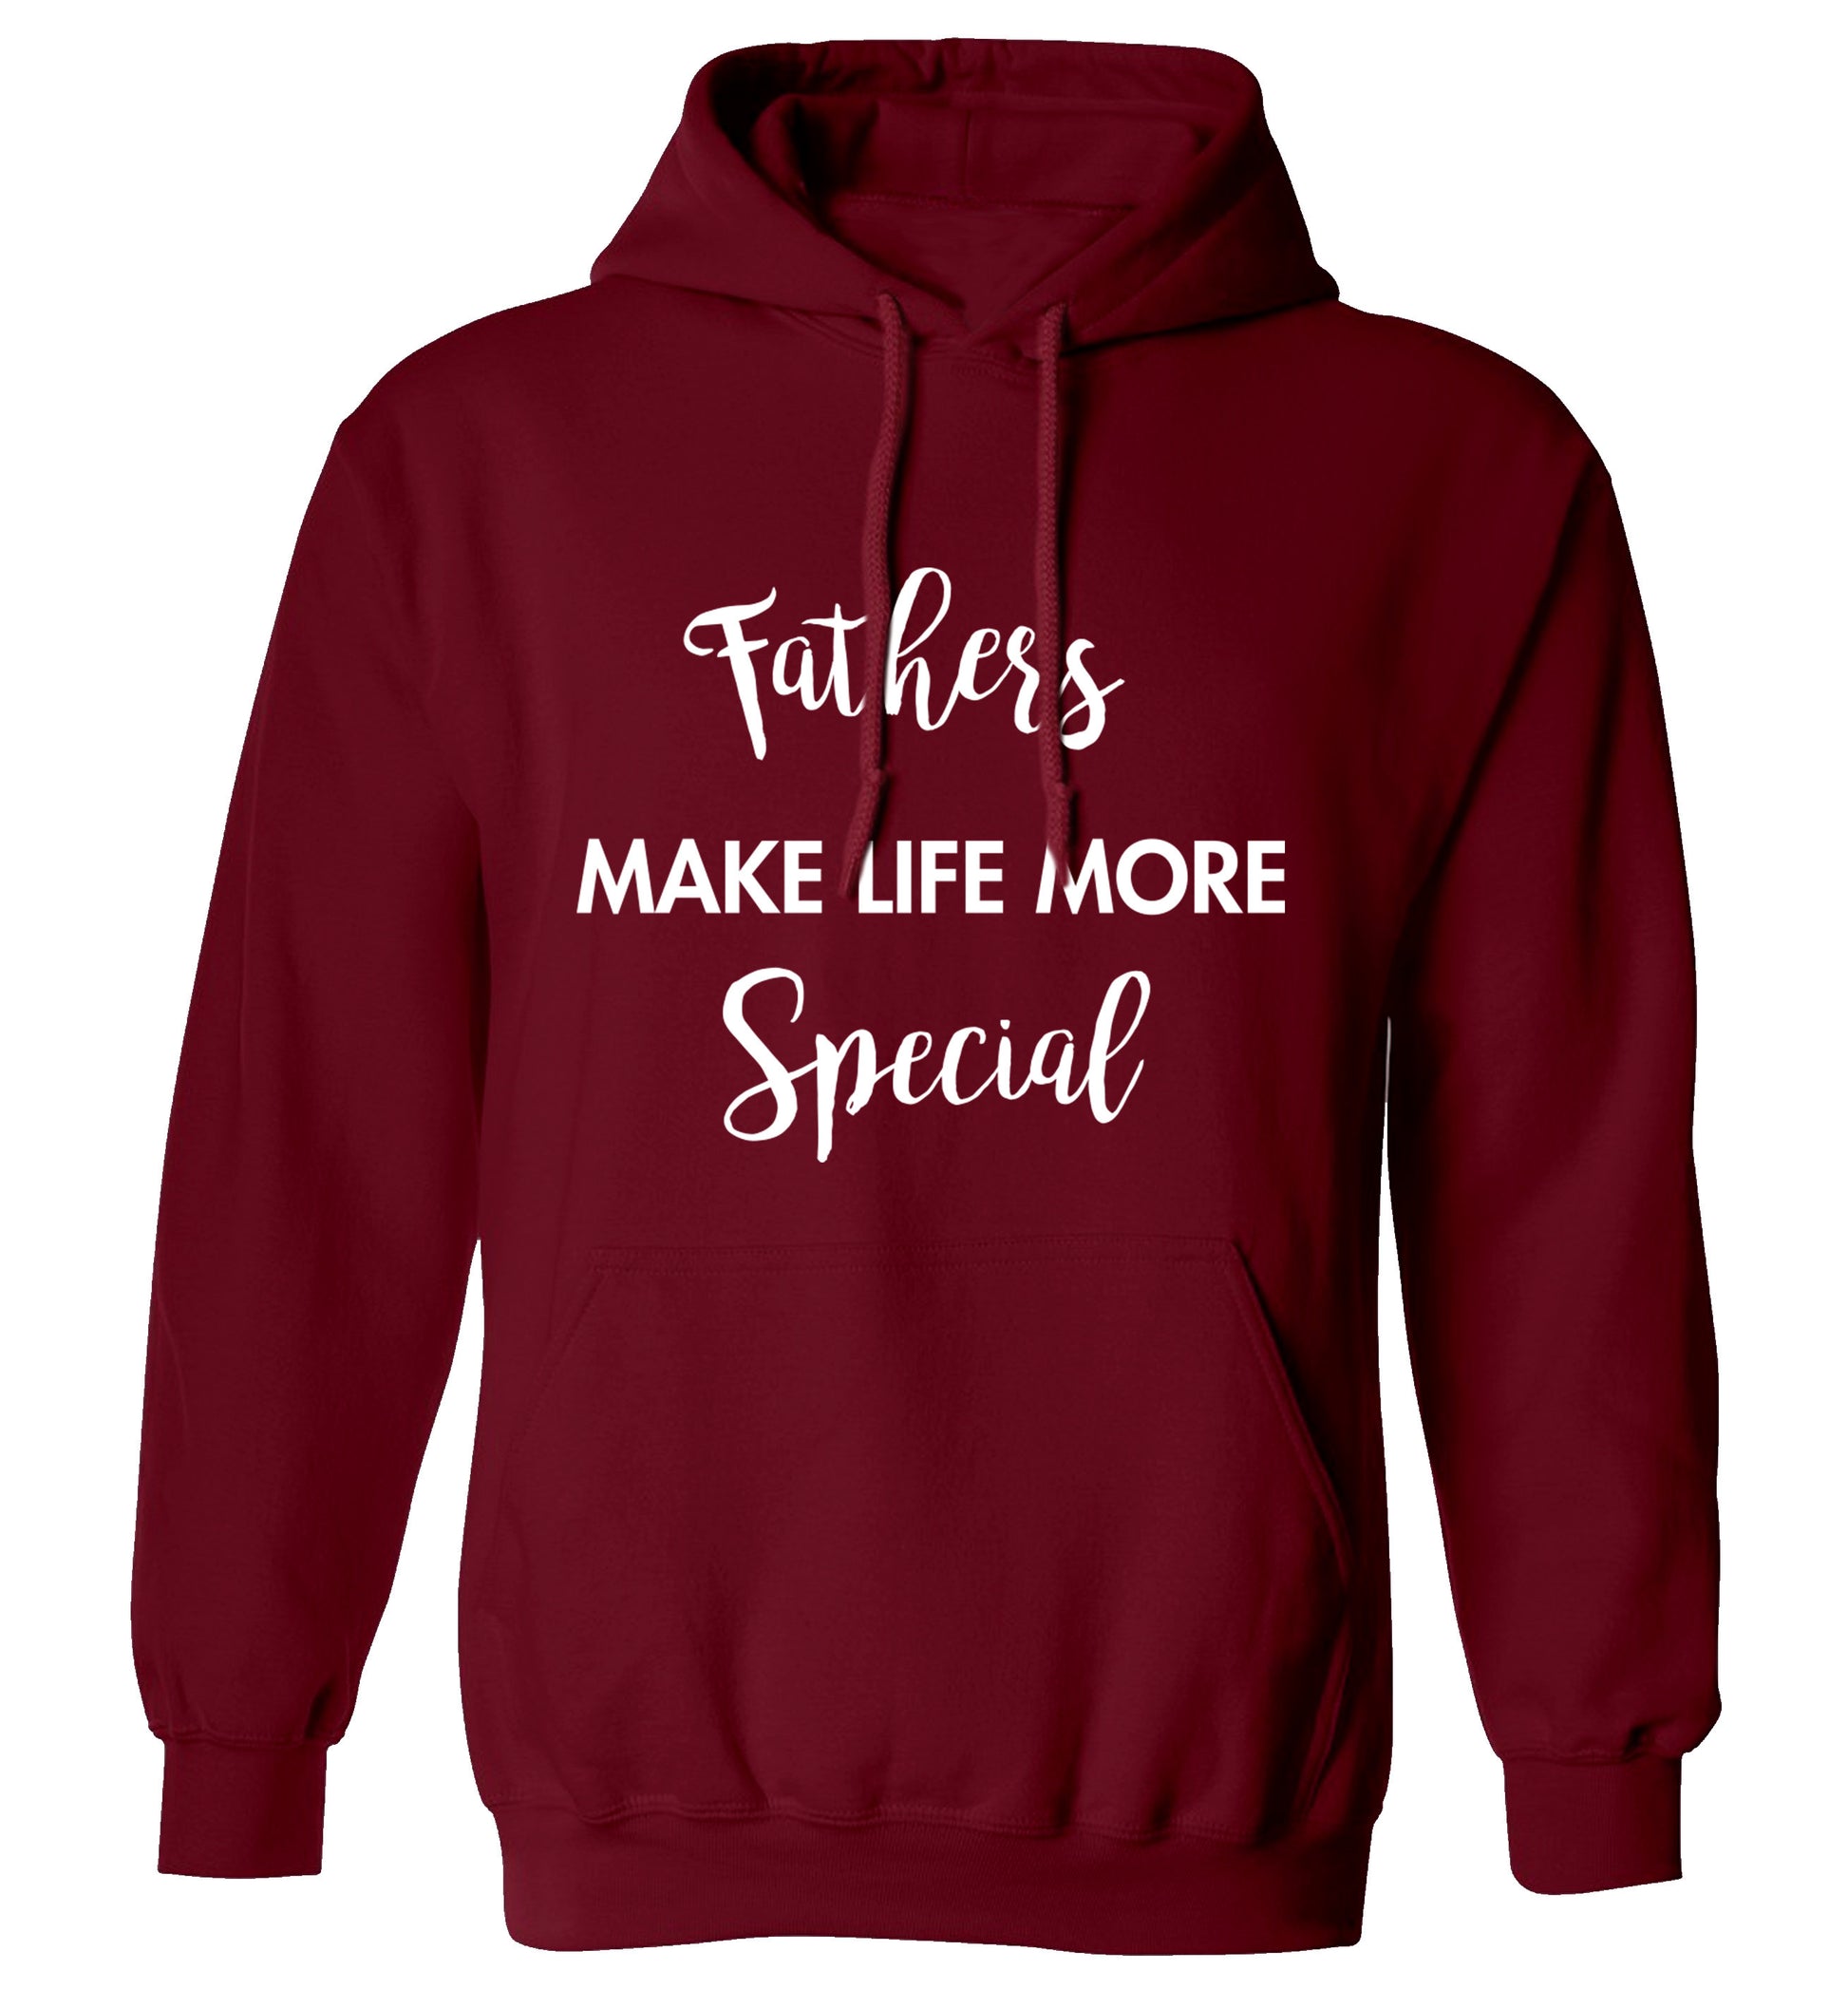 Fathers make life more special adults unisex maroon hoodie 2XL